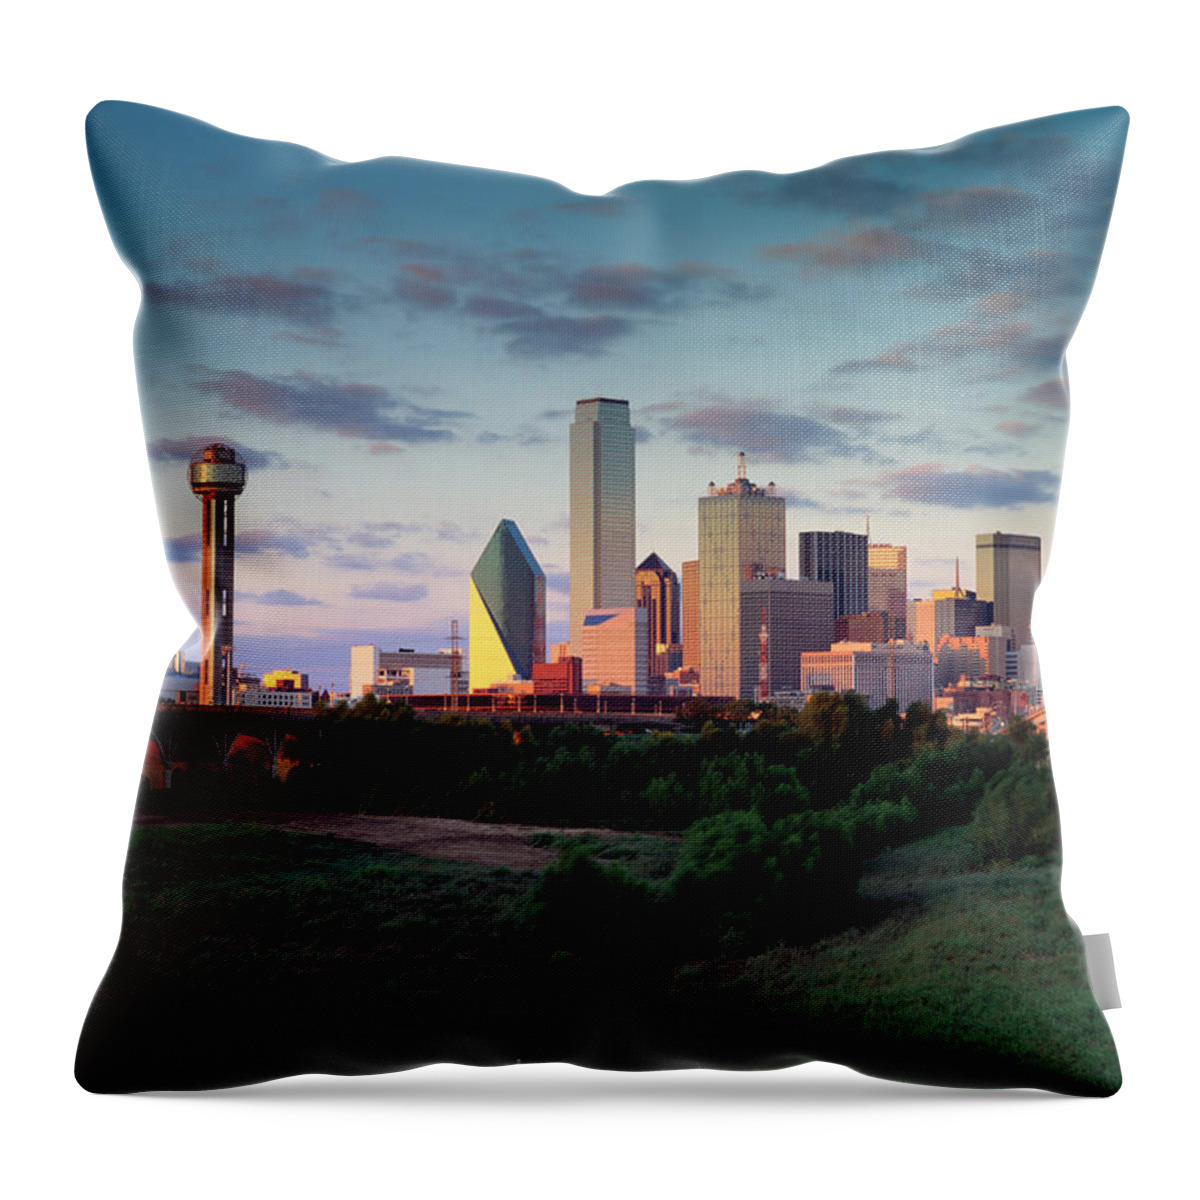 Downtown District Throw Pillow featuring the photograph Dallas Skyline #4 by Jeremy Woodhouse